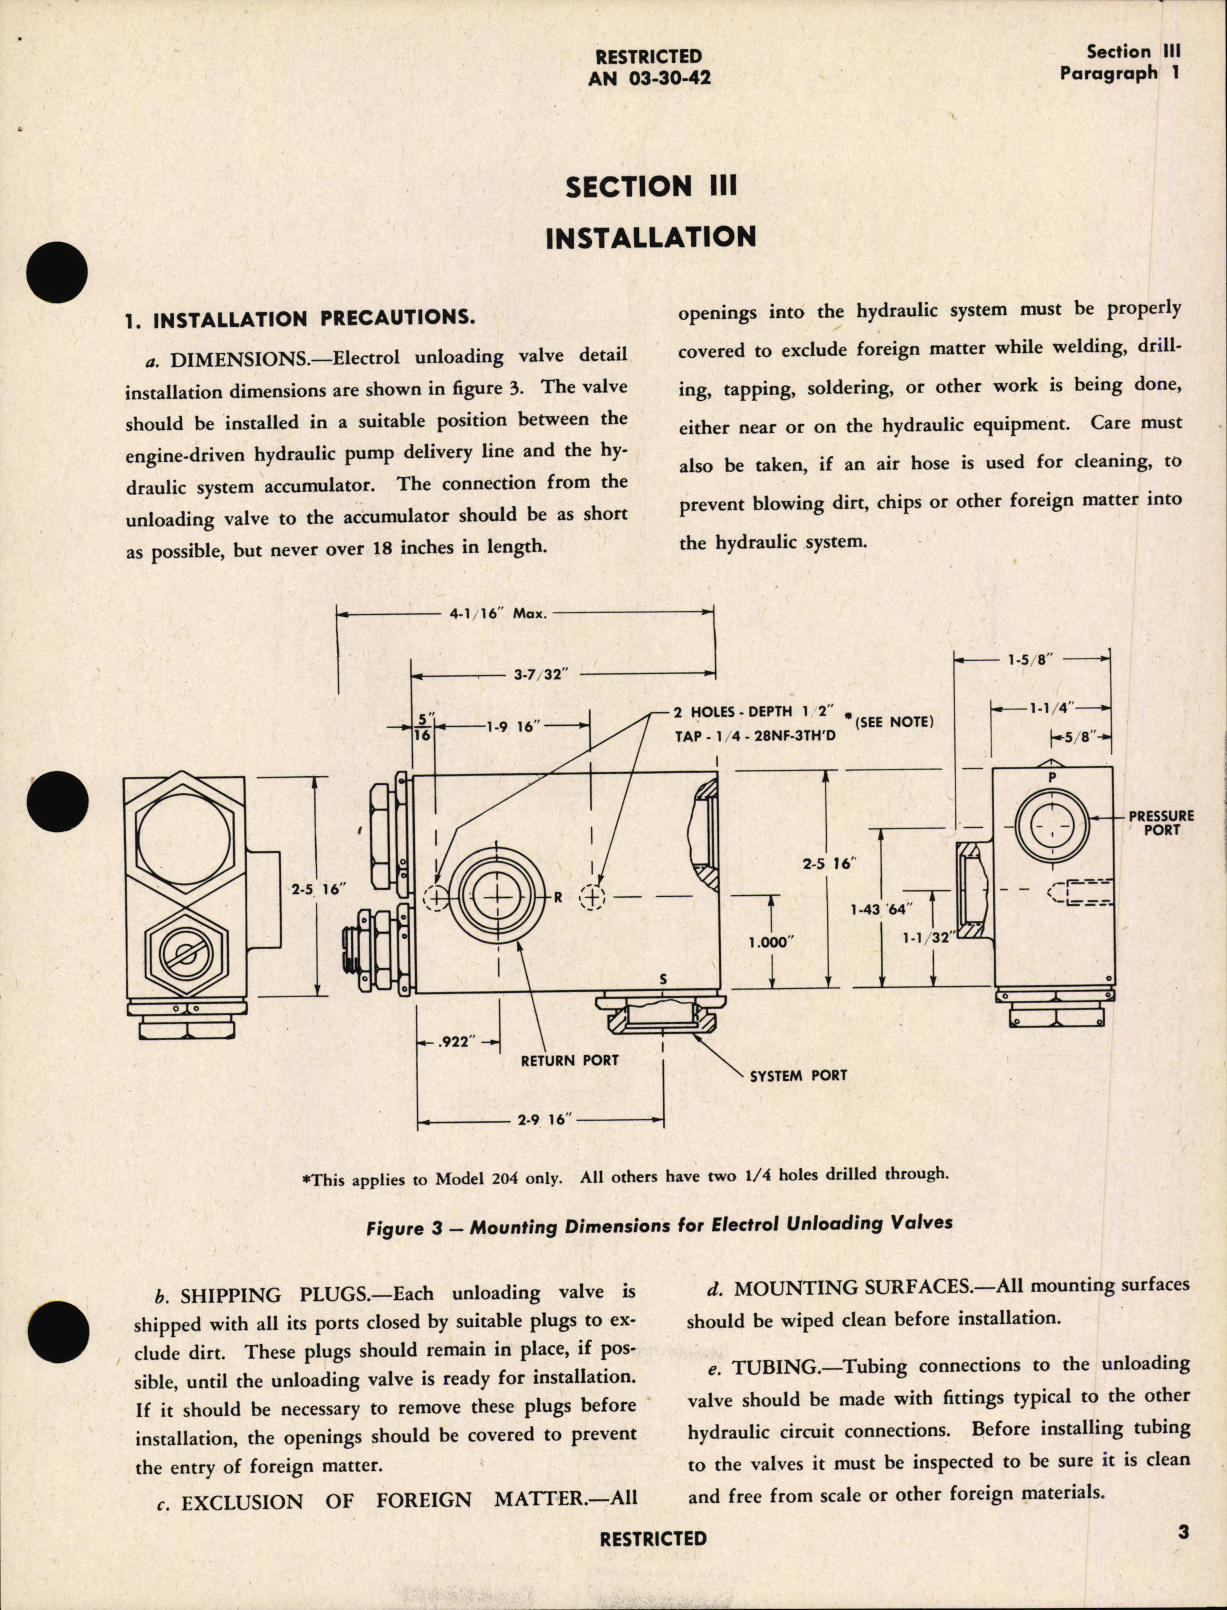 Sample page 7 from AirCorps Library document: Handbook of Instructions with Parts Catalog for Unloading Valves